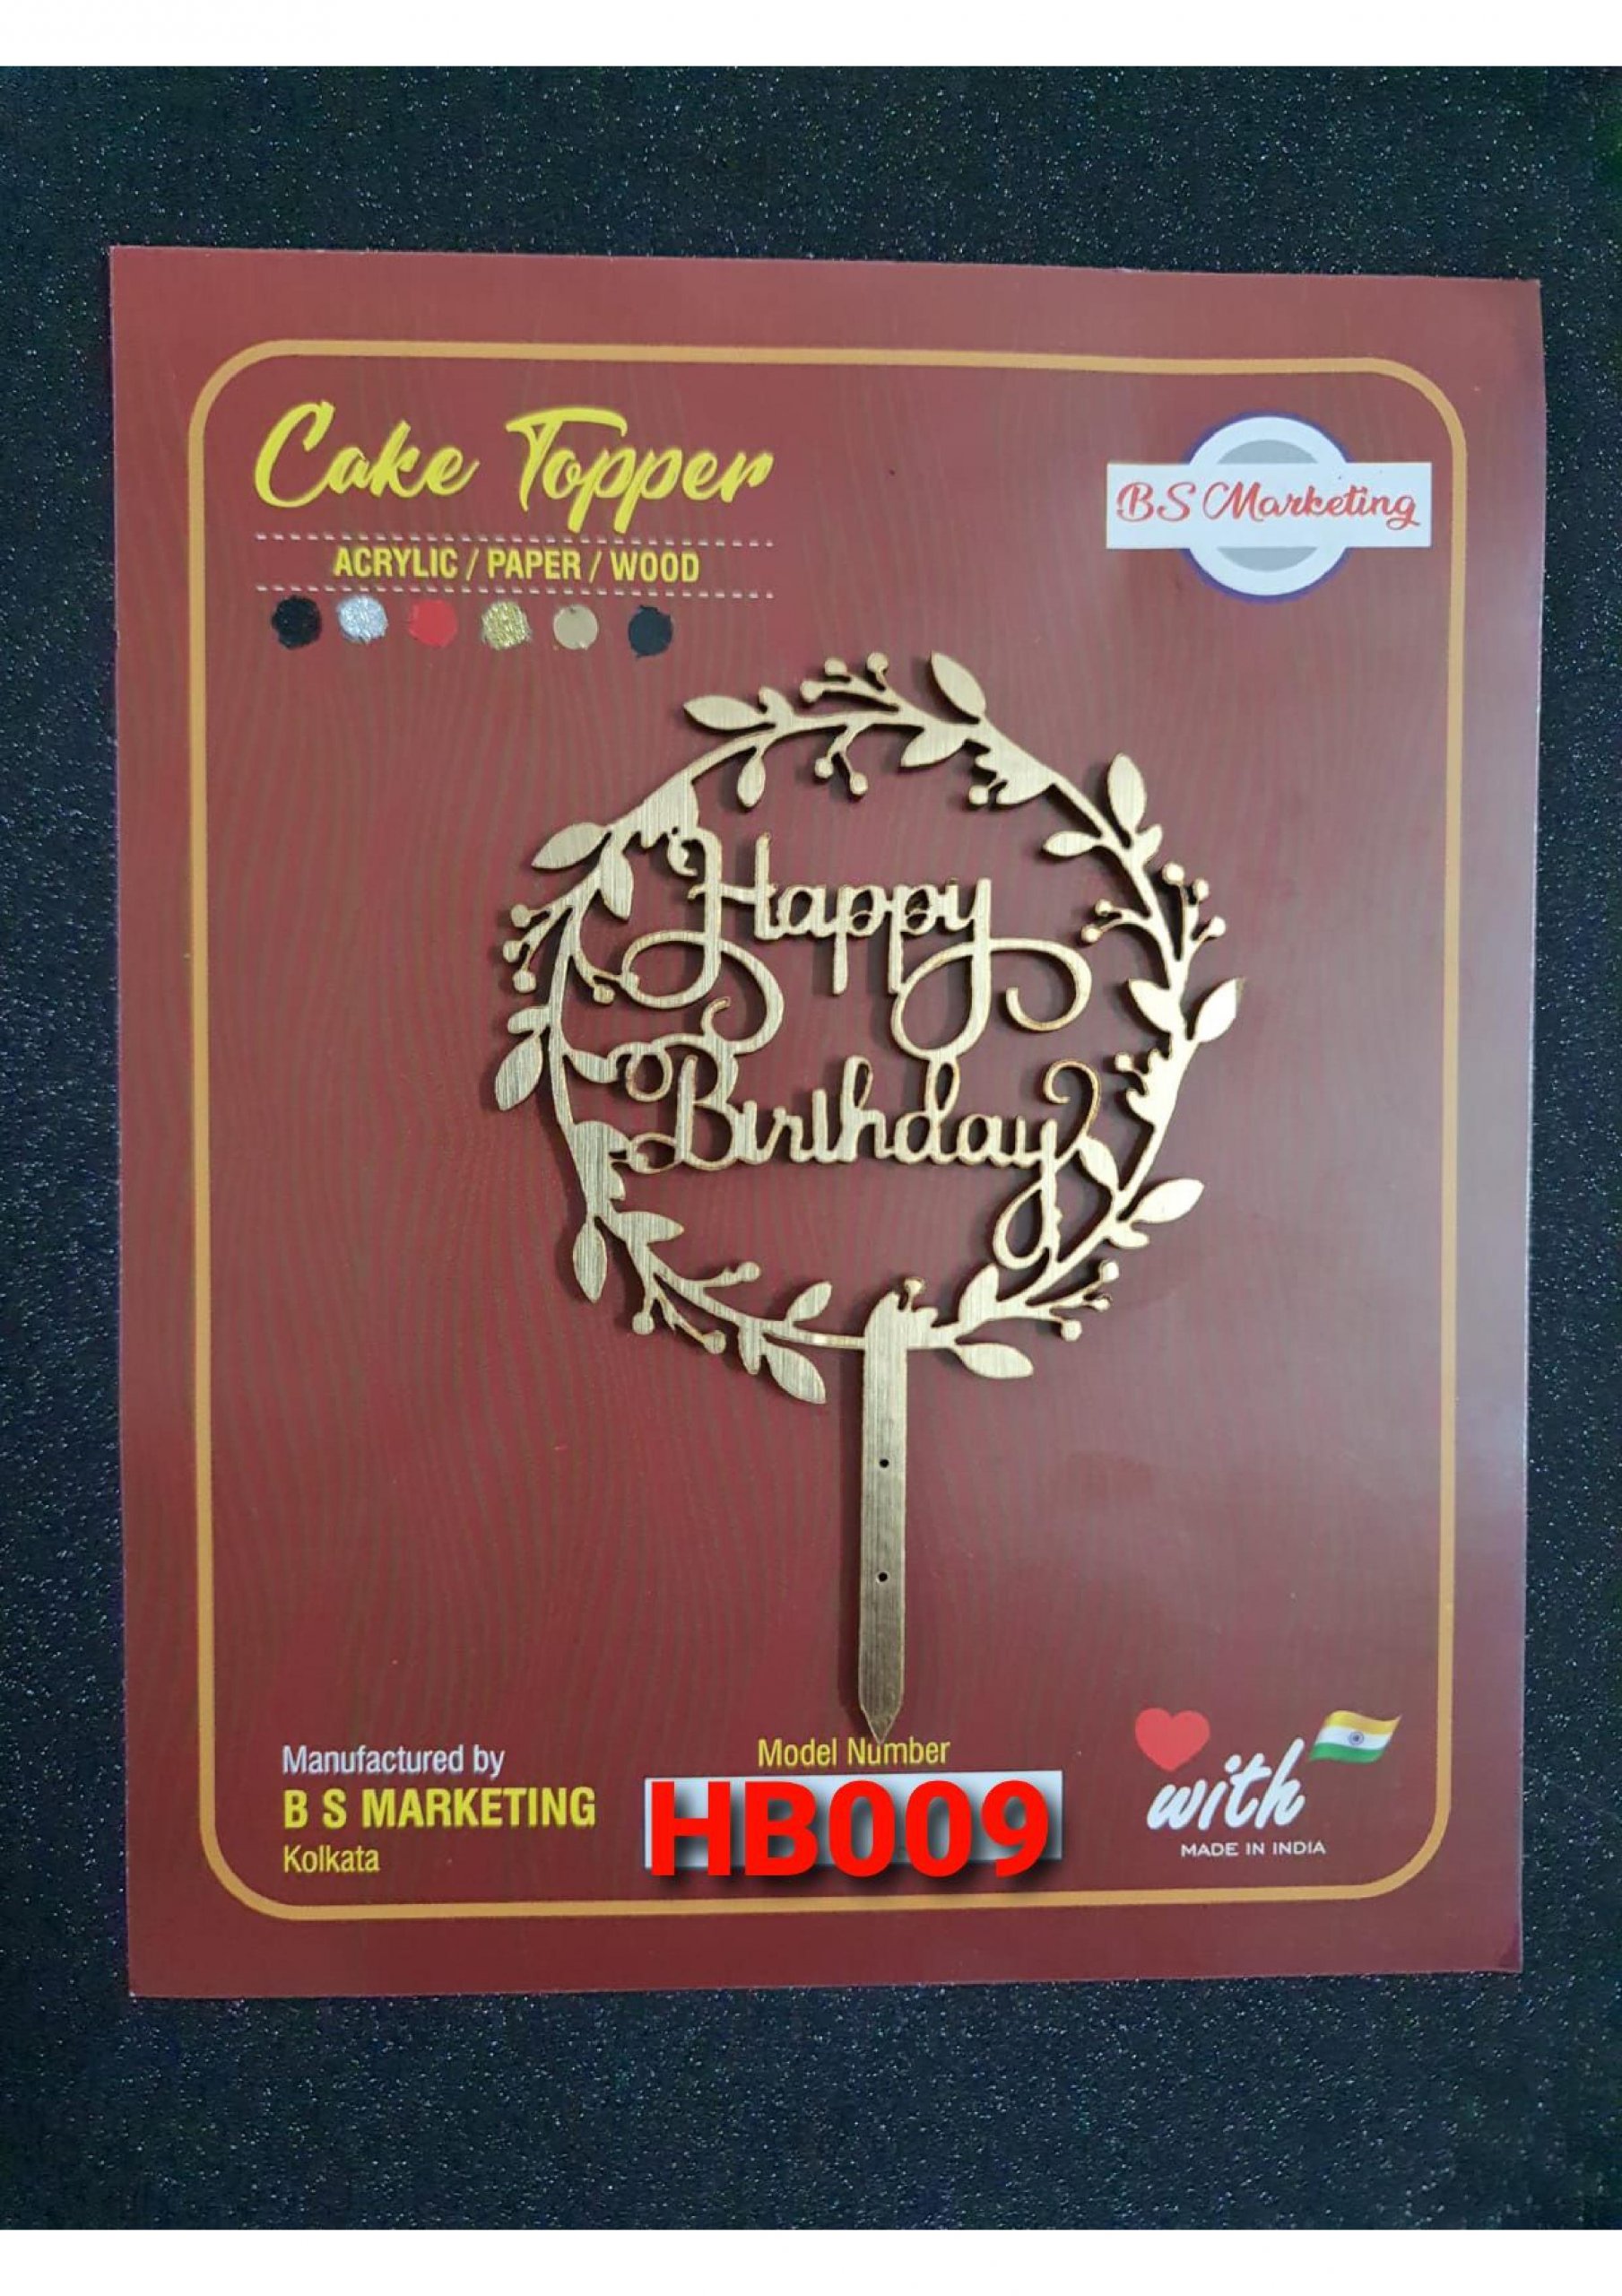 Customisable Cake Topper for Birthday Cake | All About Baking